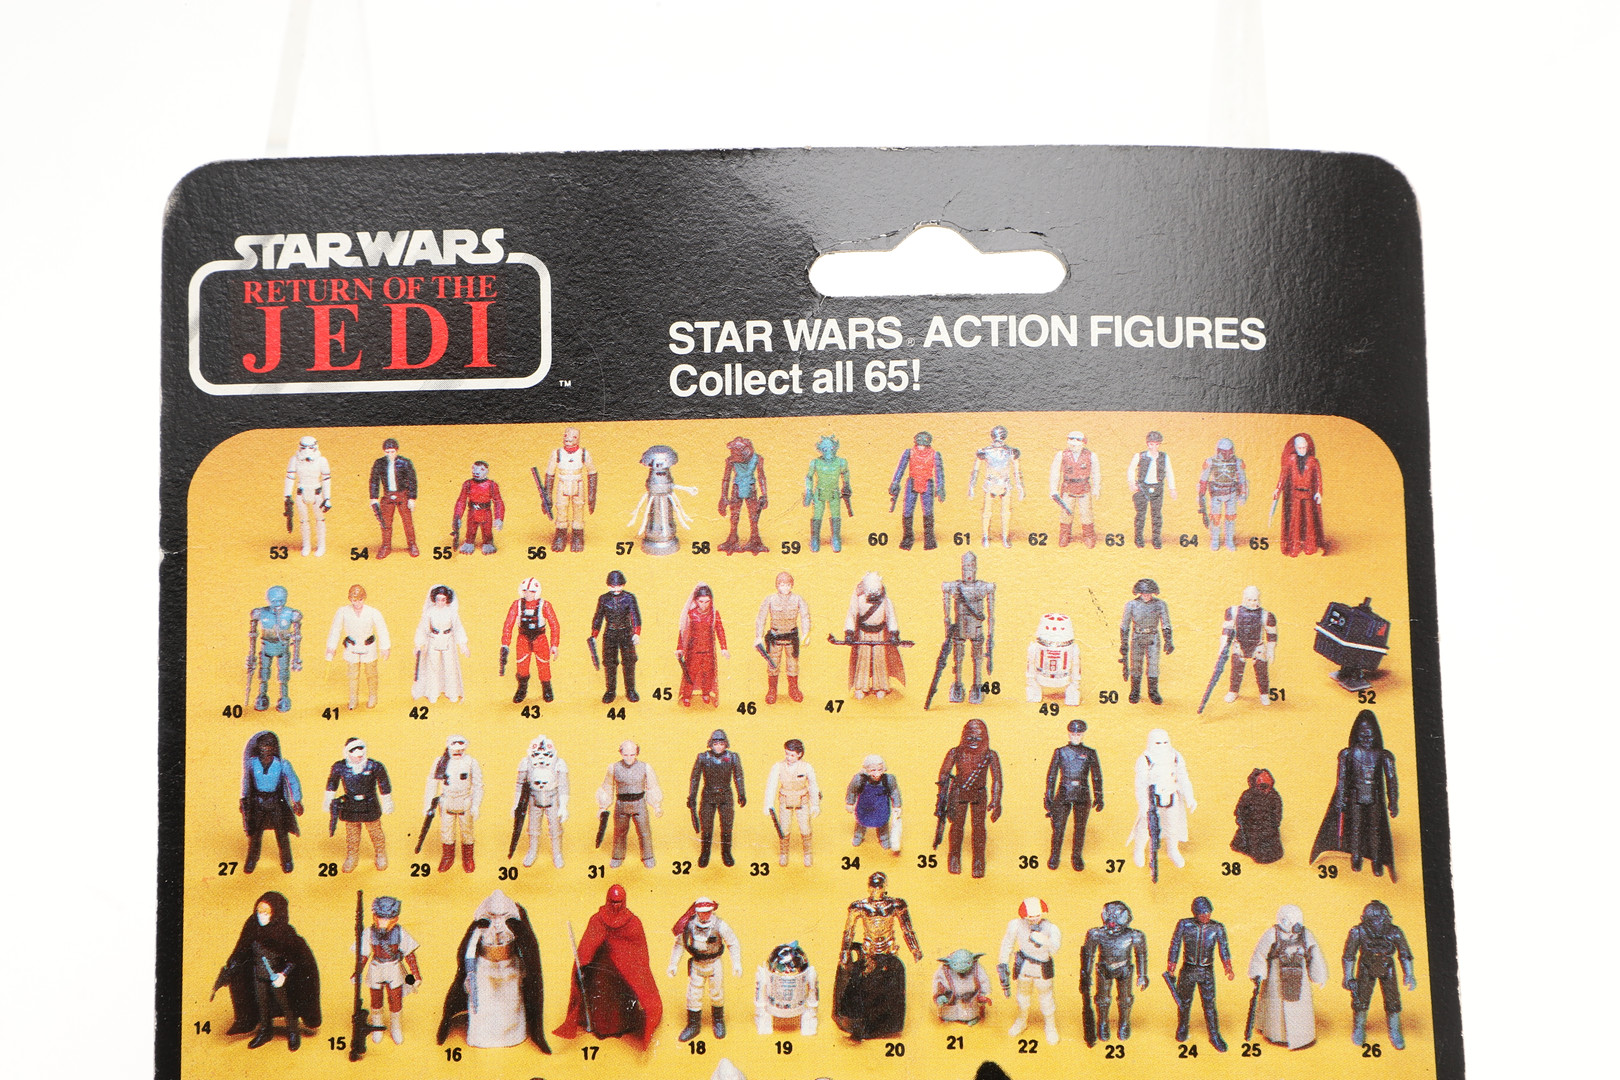 STAR WARS CARDED FIGURES - RETURN OF THE JEDI. - Image 25 of 32